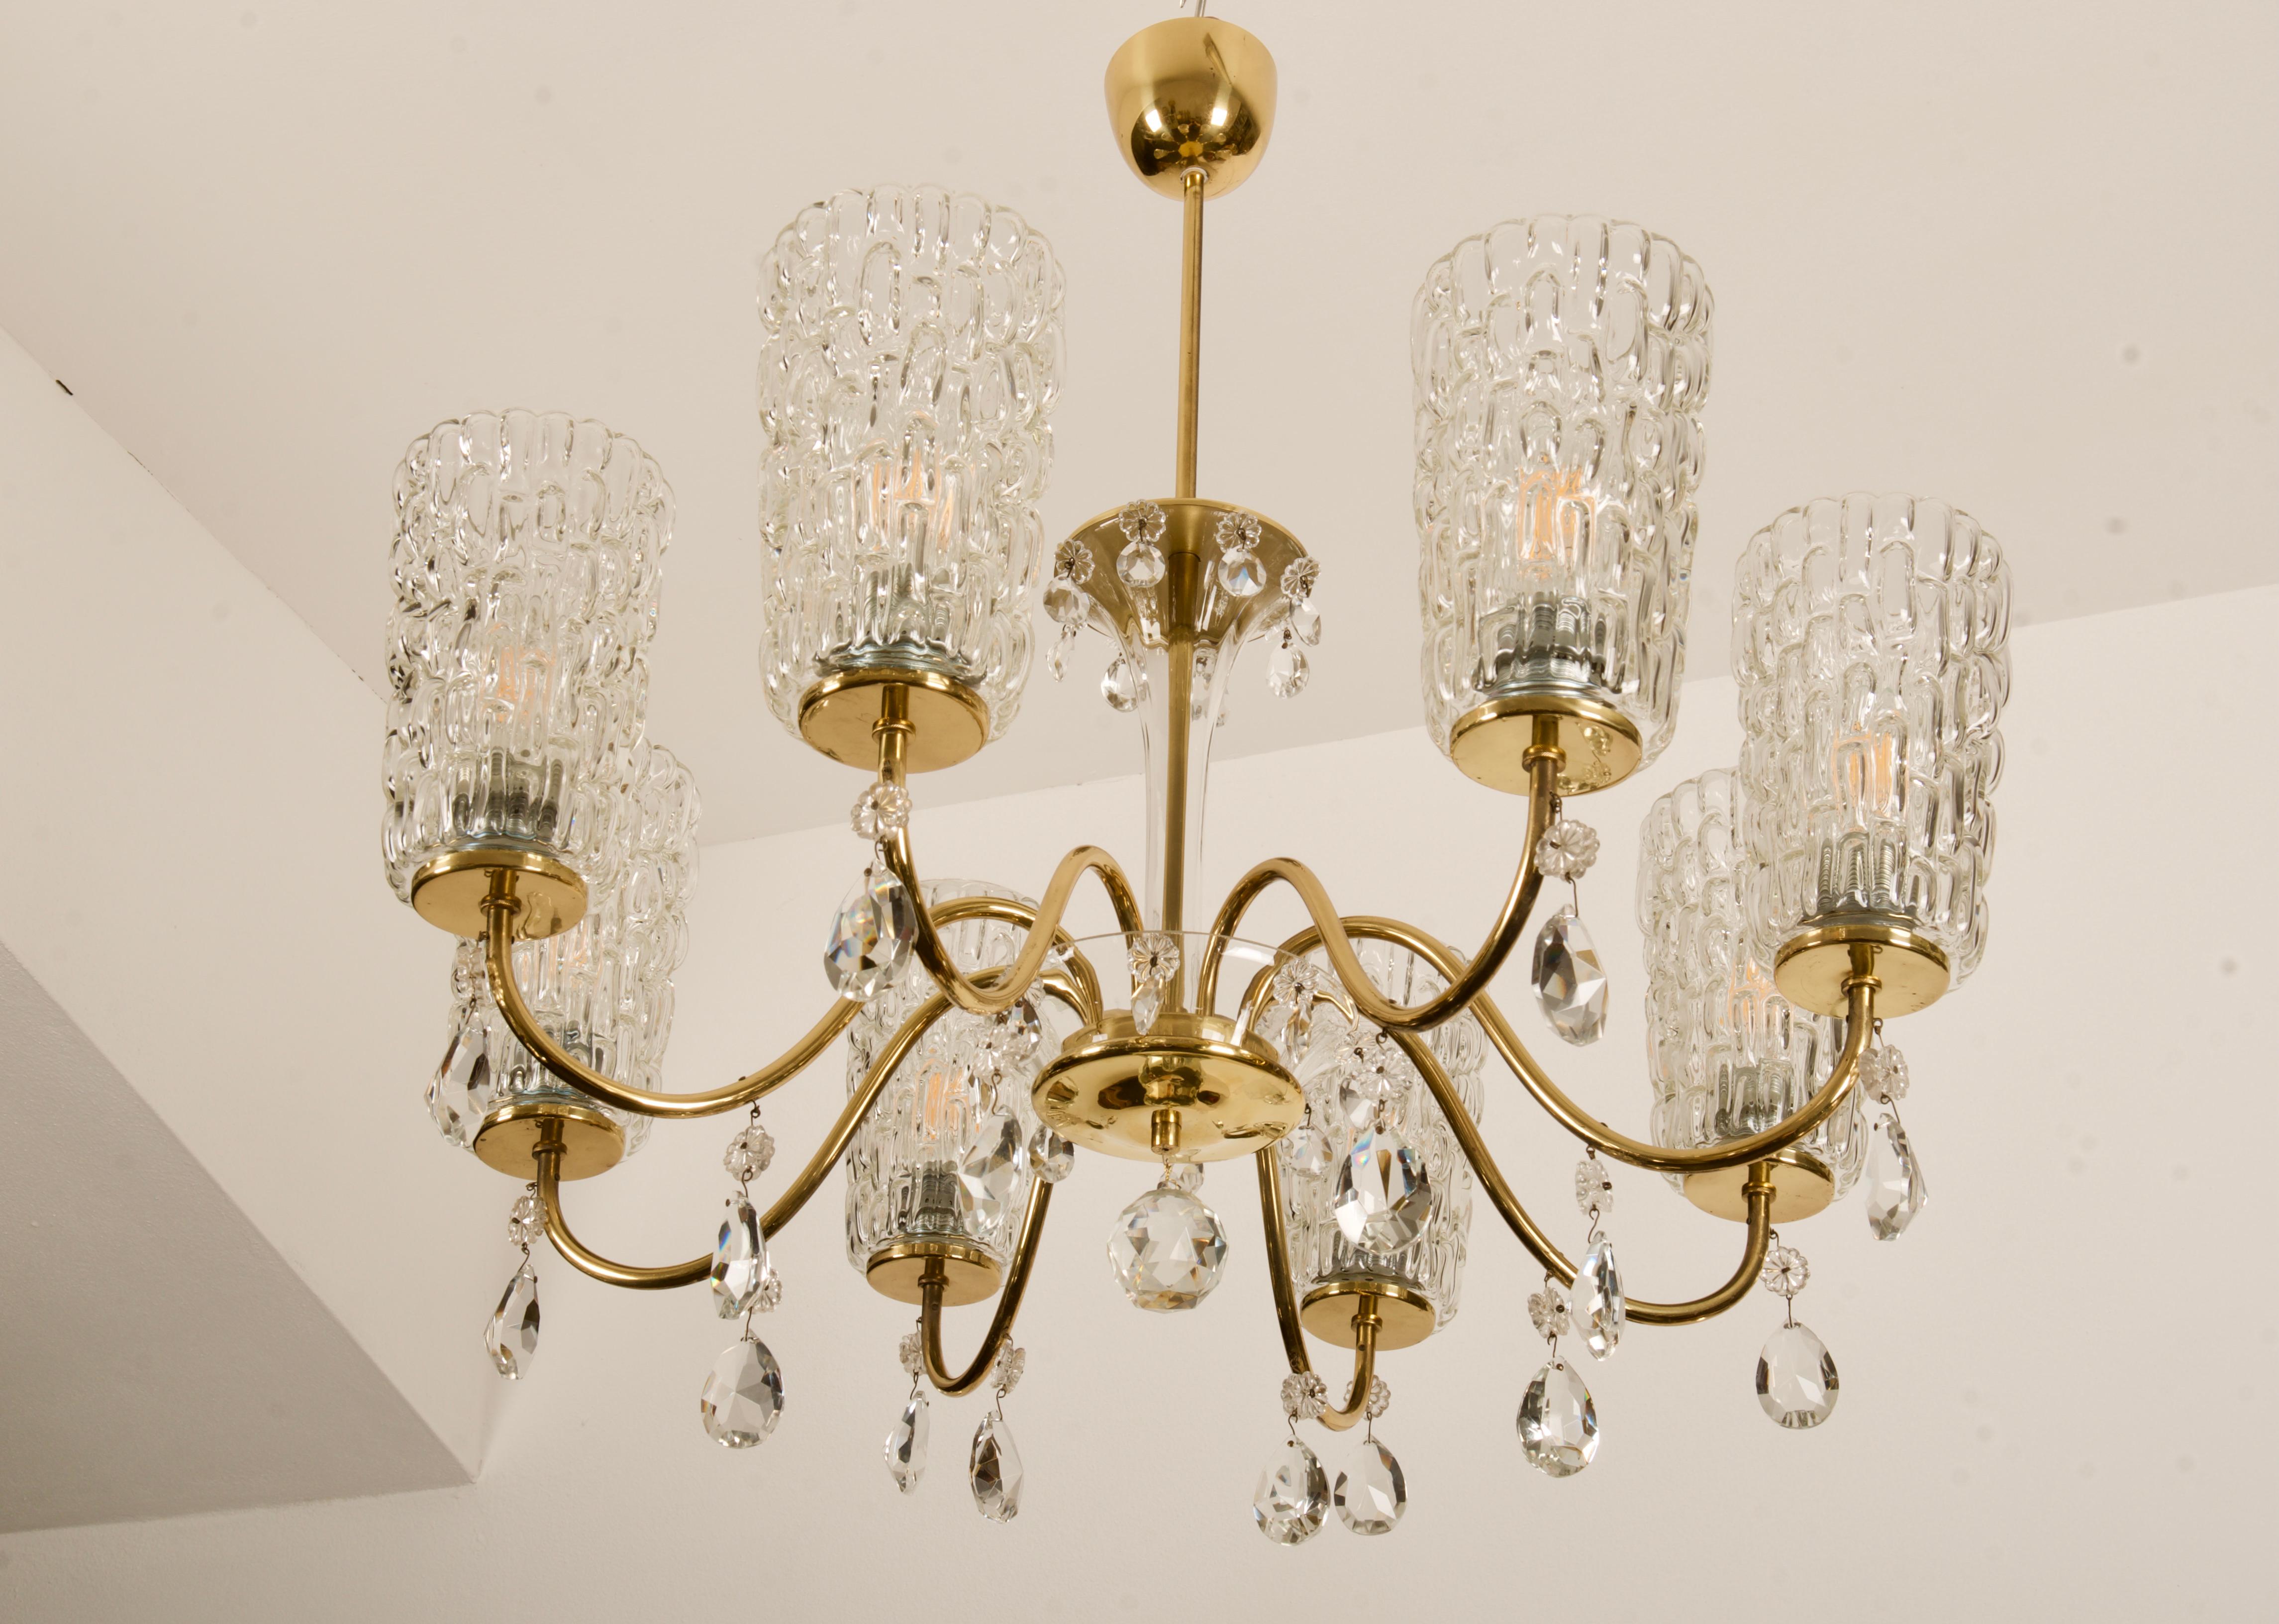 Huge Midcentury Brass Chandelier by Rupert Nikoll In Good Condition For Sale In Vienna, AT